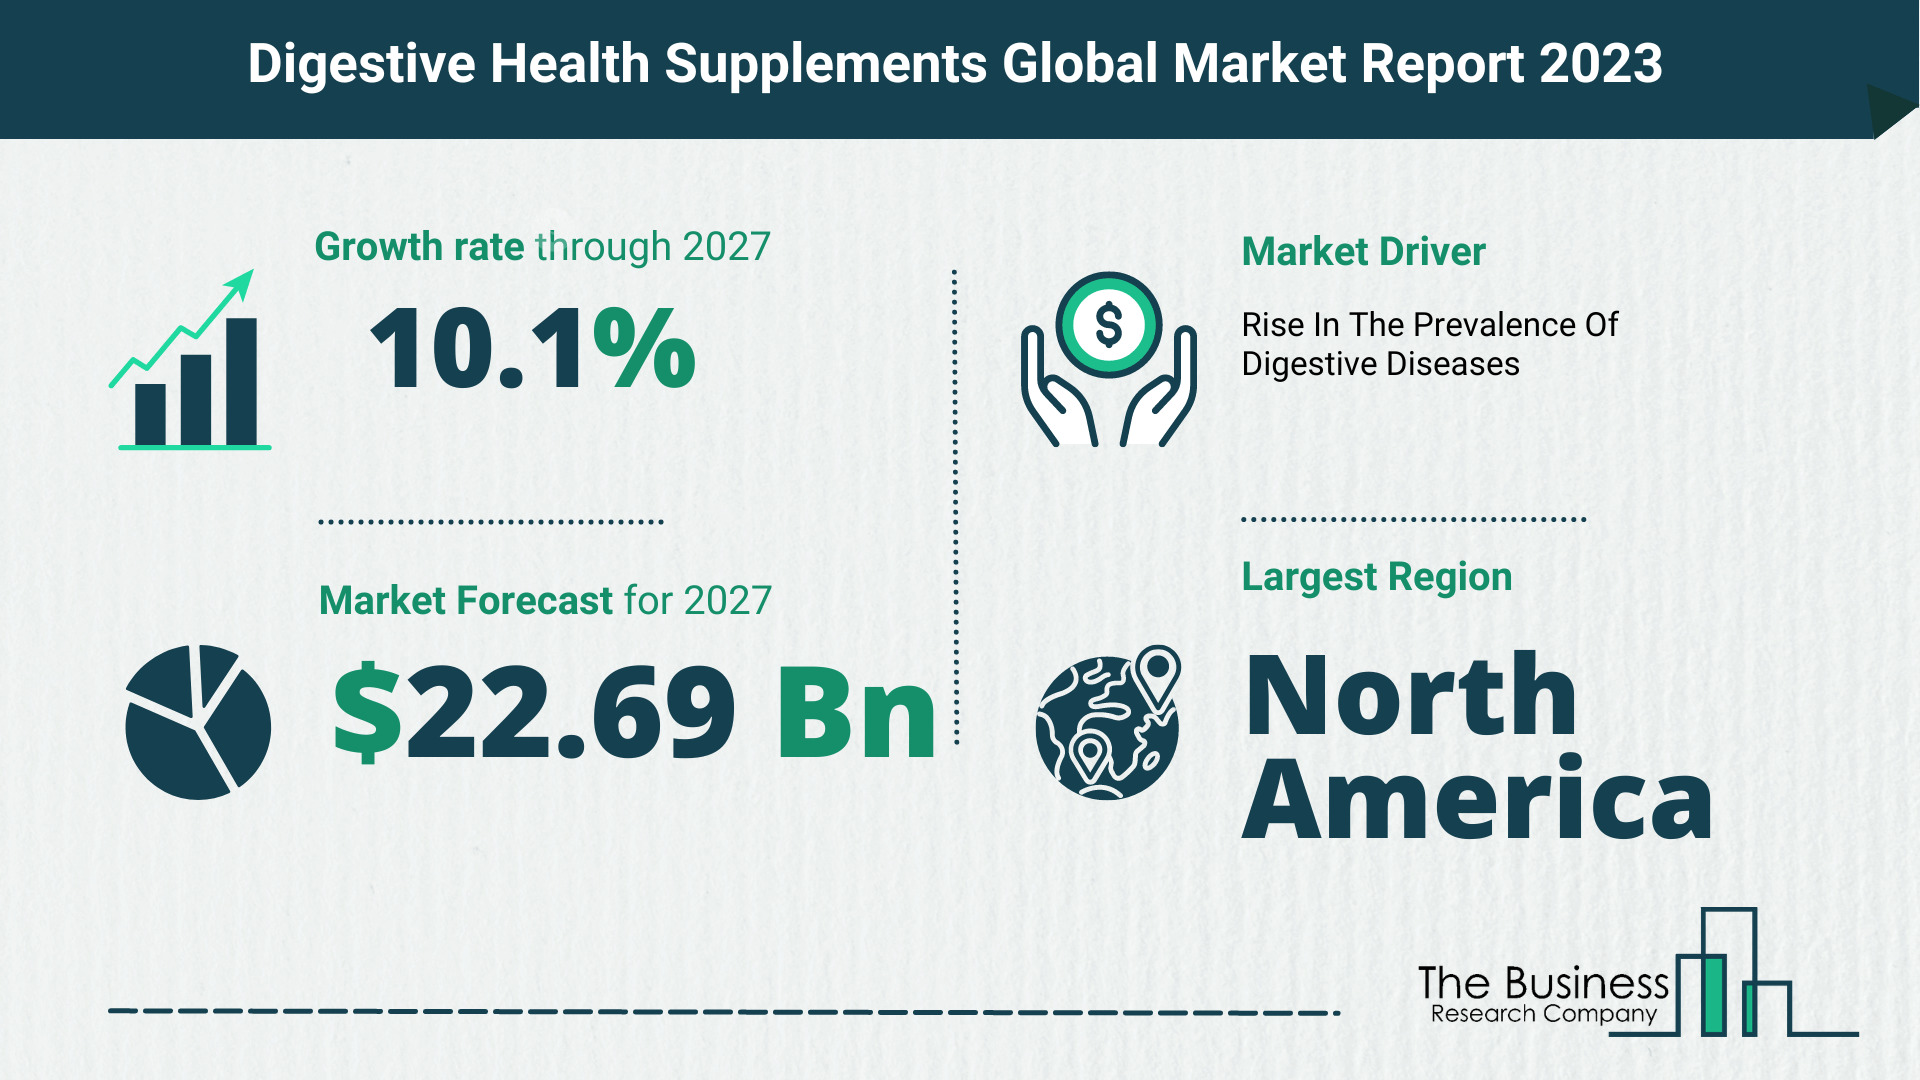 How Will The Digestive Health Supplements Market Globally Expand In 2023?